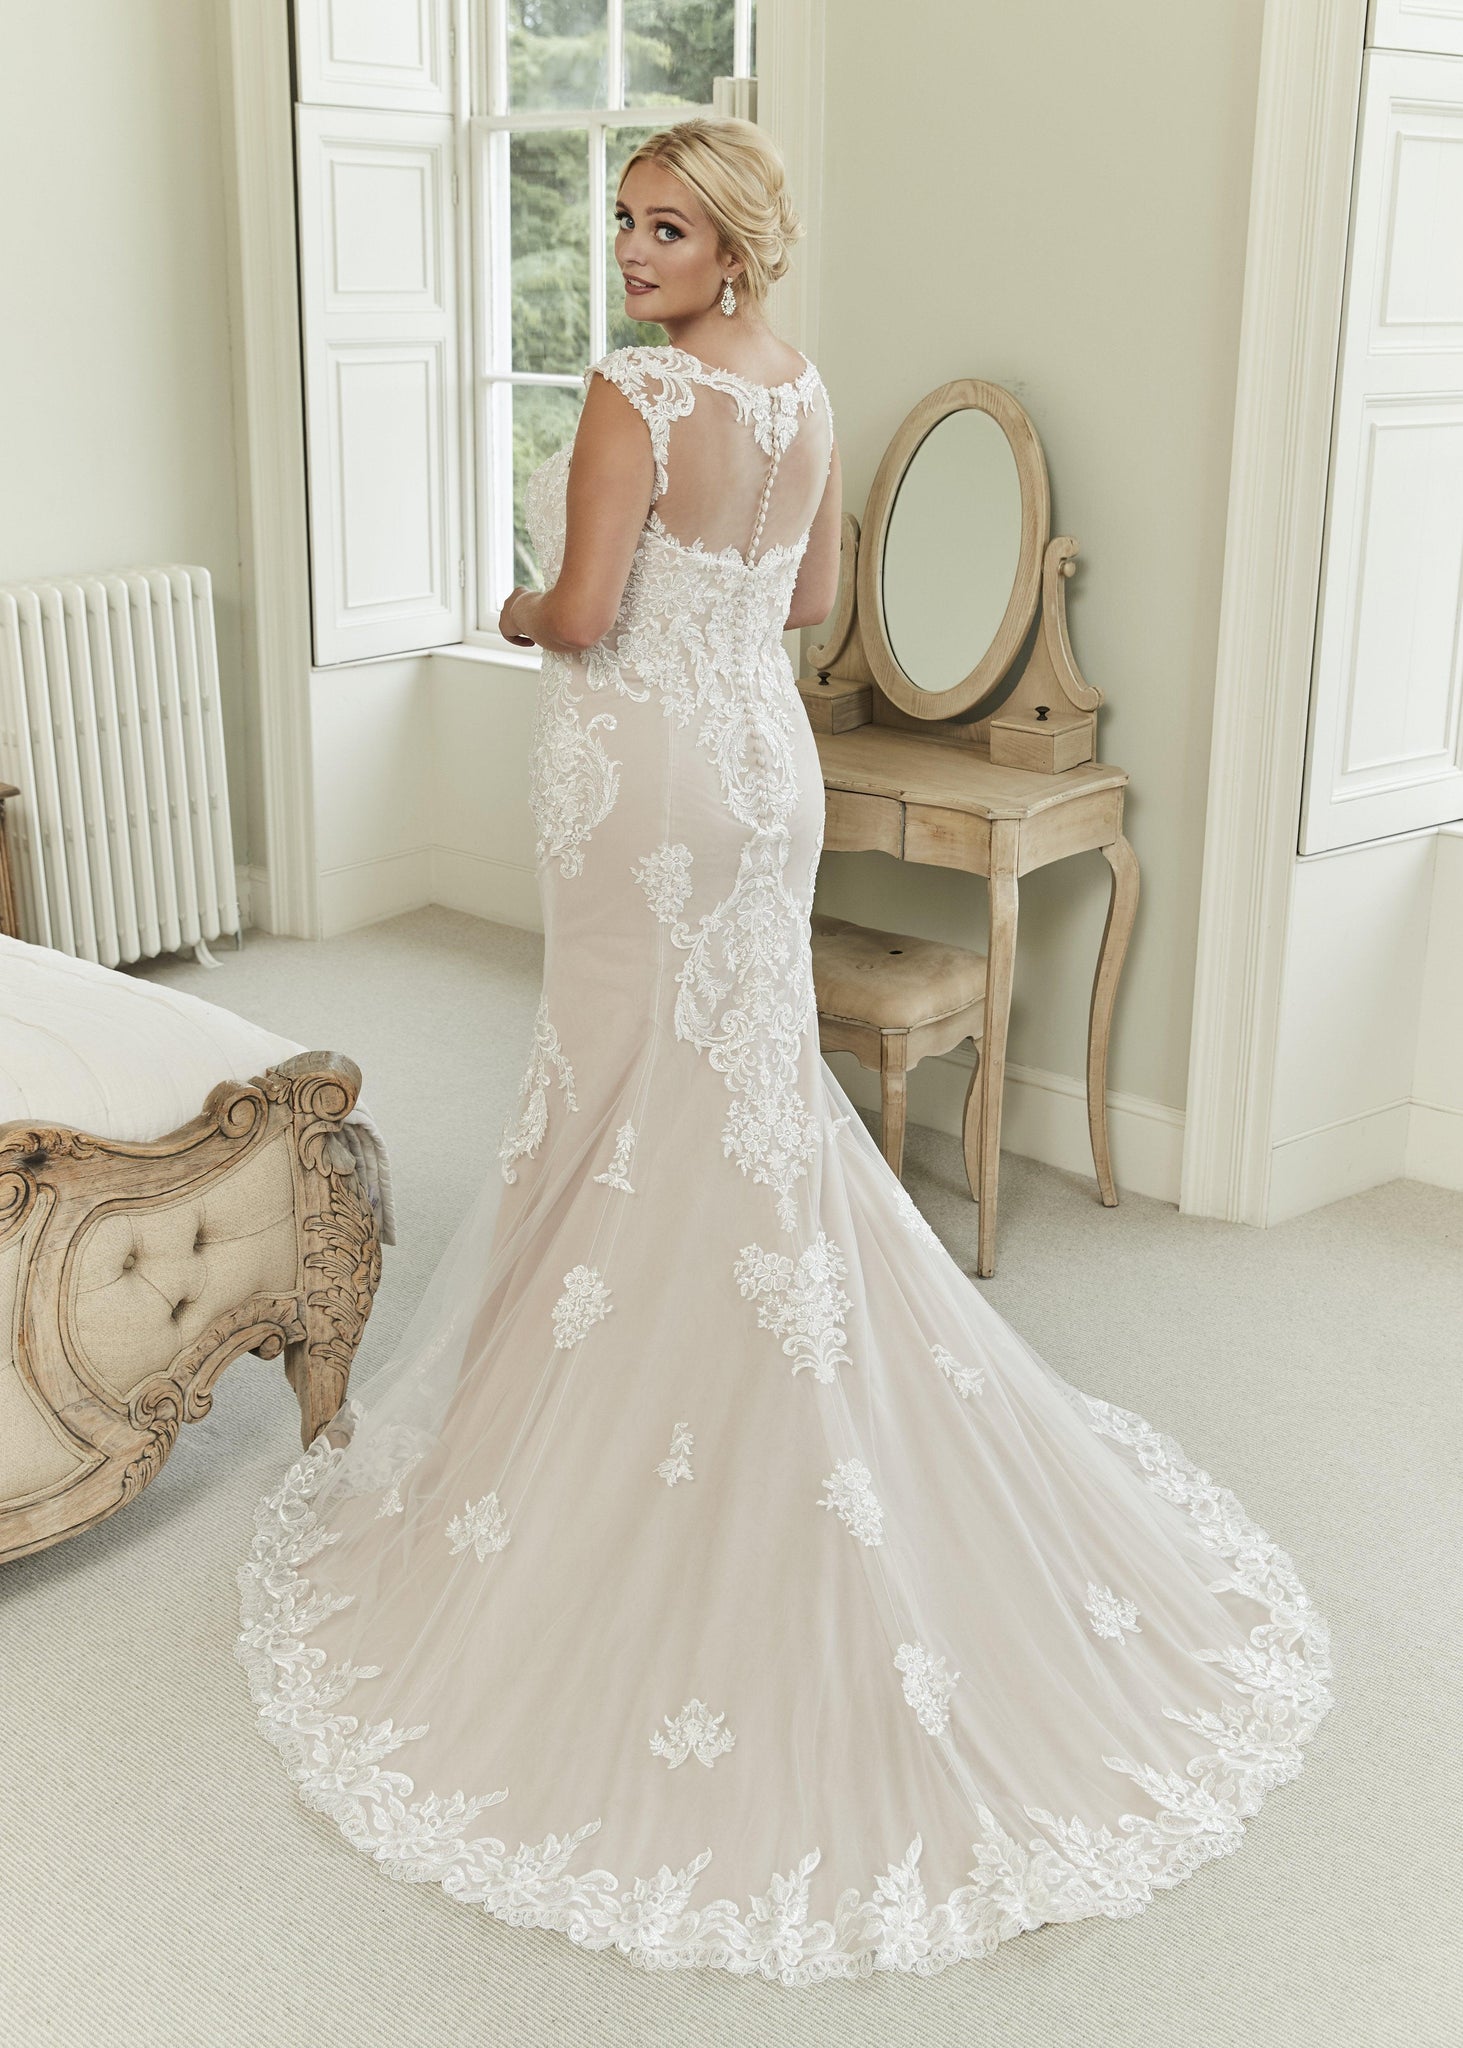 UK20 LisaMarie - Adore Bridal and Occasion Wear